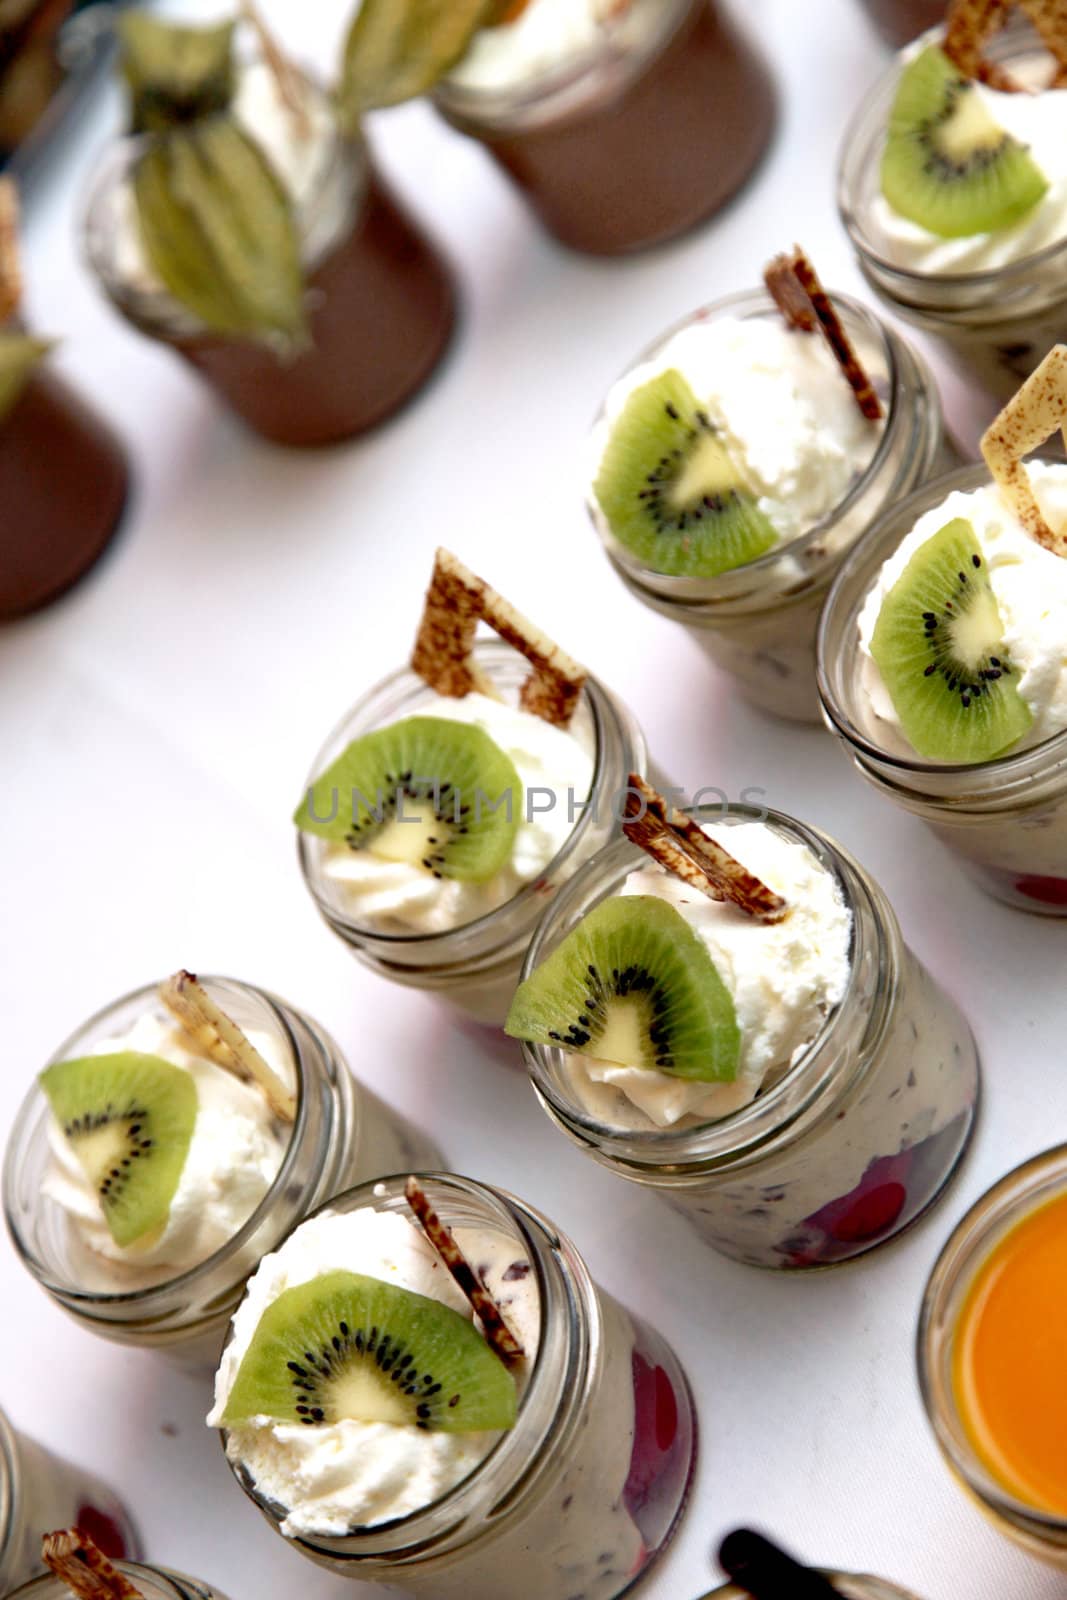 sweet dessert decorated with kiwi-served in the glass close-up
 